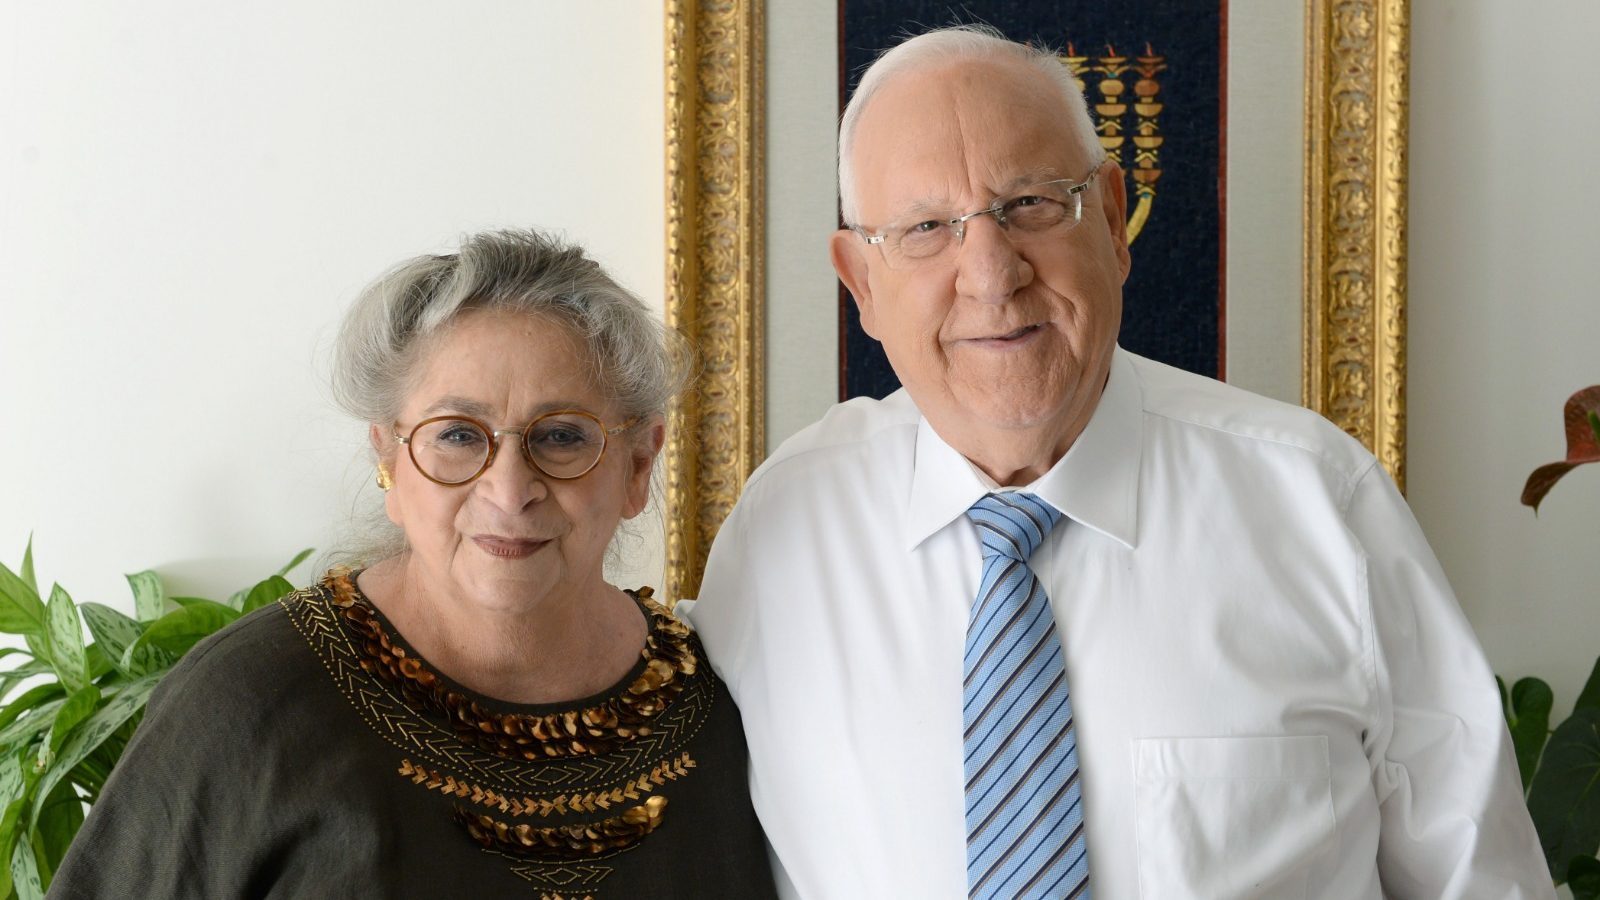 Nechama Rivlin, First Lady of Israel, Dies at 73